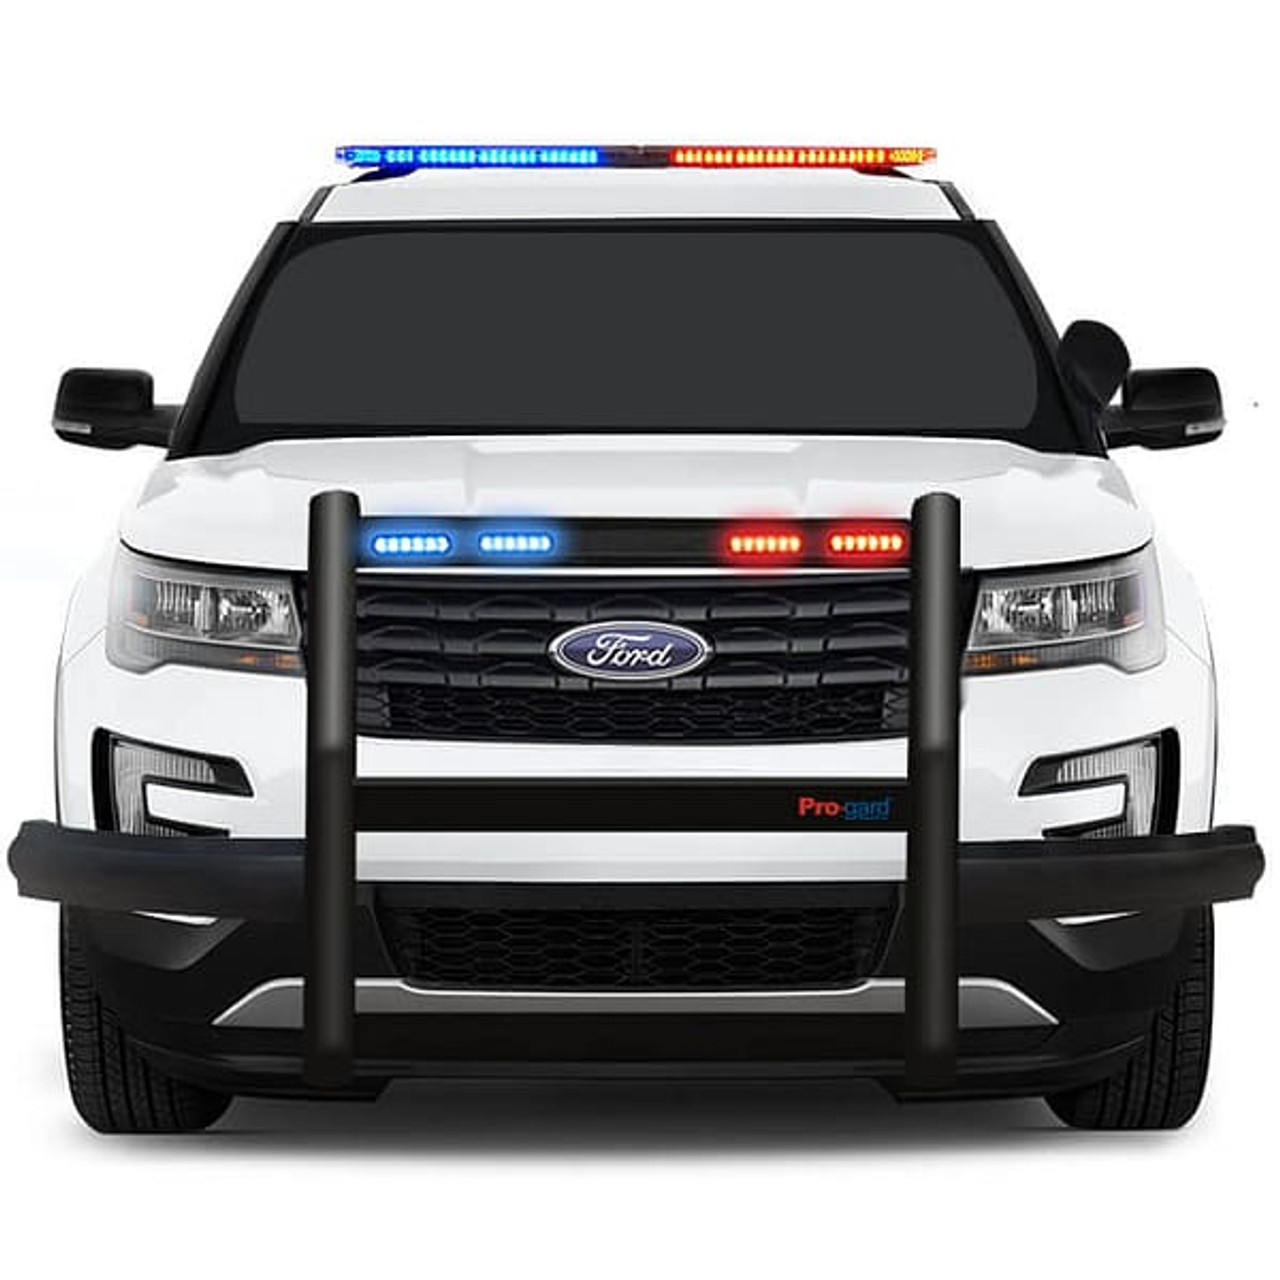 Pro-Gard HD Push Bumpers, Integrated LED, Non-Lit, 2, or 4 Whelen ION LED Lights, Includes Wire Cover Panels, For Ford Interceptor Utility/Sedan, F150 Responder/SSV, Expedition, Chevrolet Tahoe PPV, Suburban, Silverado, Dodge Charger, RAM, or Durango